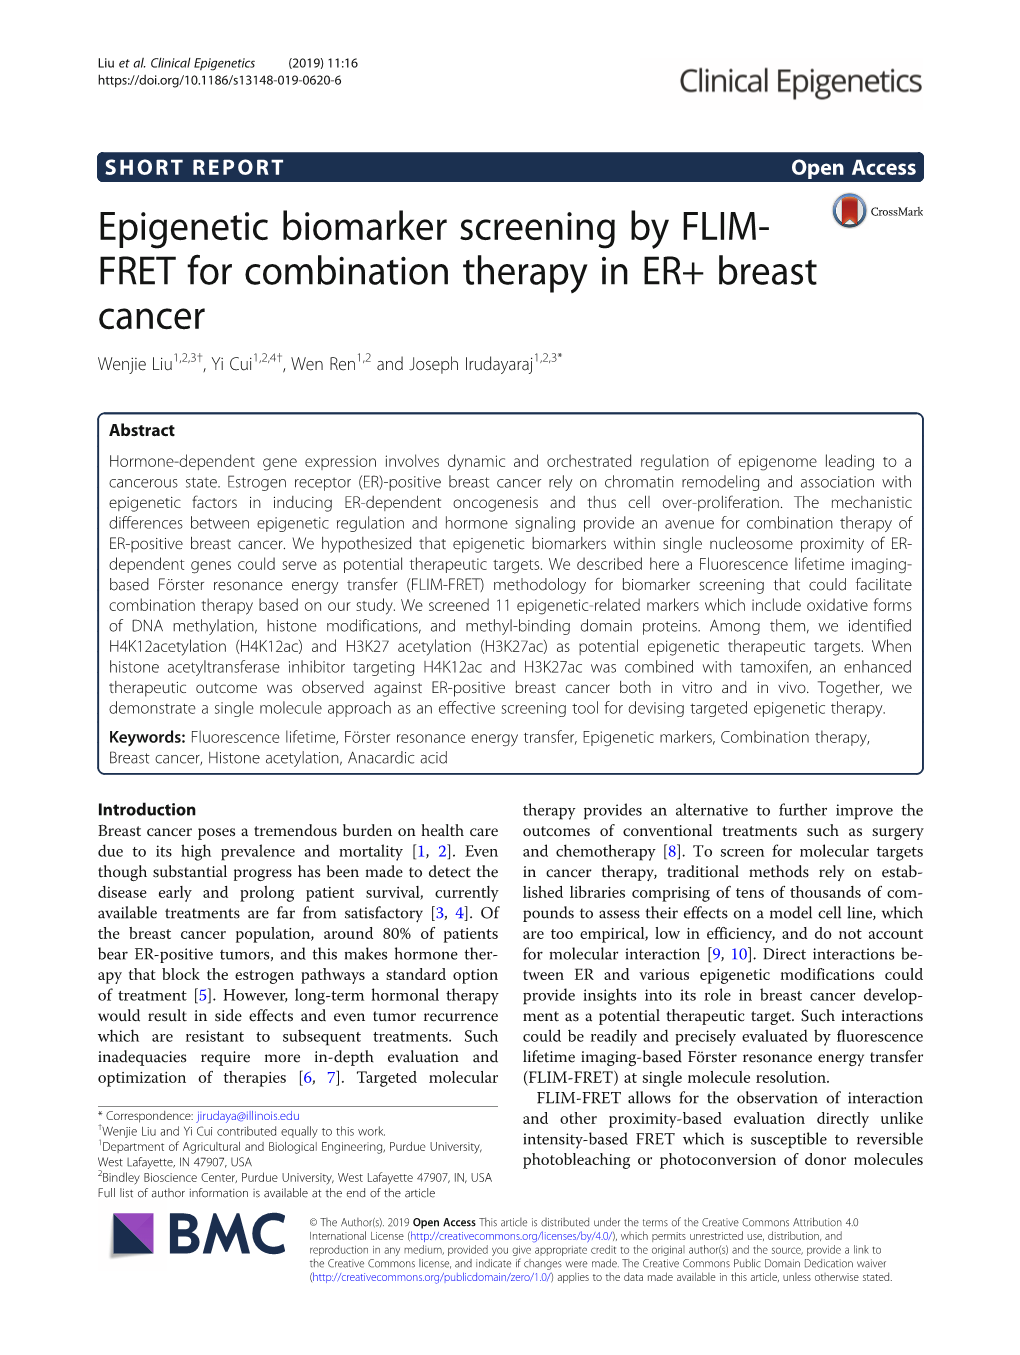 Epigenetic Biomarker Screening by FLIM-FRET for Combination Therapy in ER+ Breast Cancer